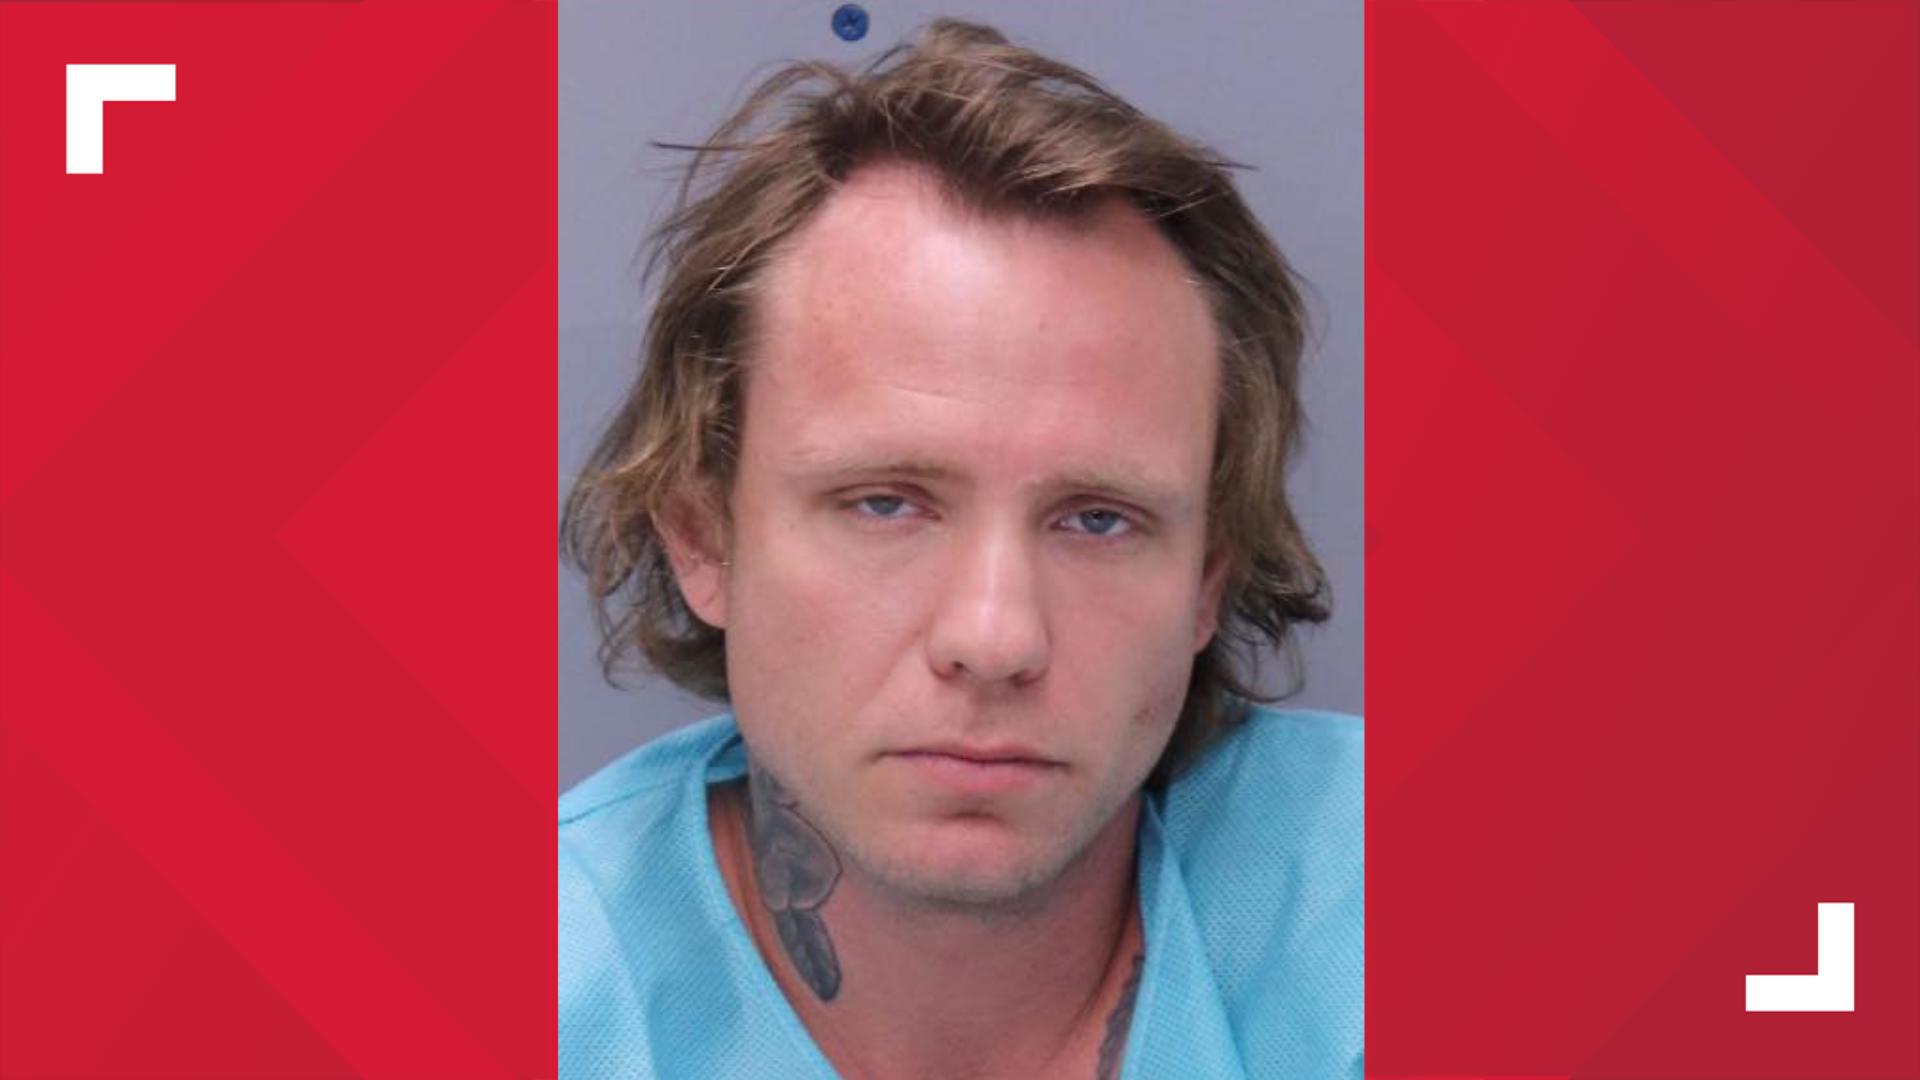 Matthew Dalton, 29, is accused of driving under the influence and fleeing law enforcement after deputies tried to initiate a traffic stop on Saturday night.